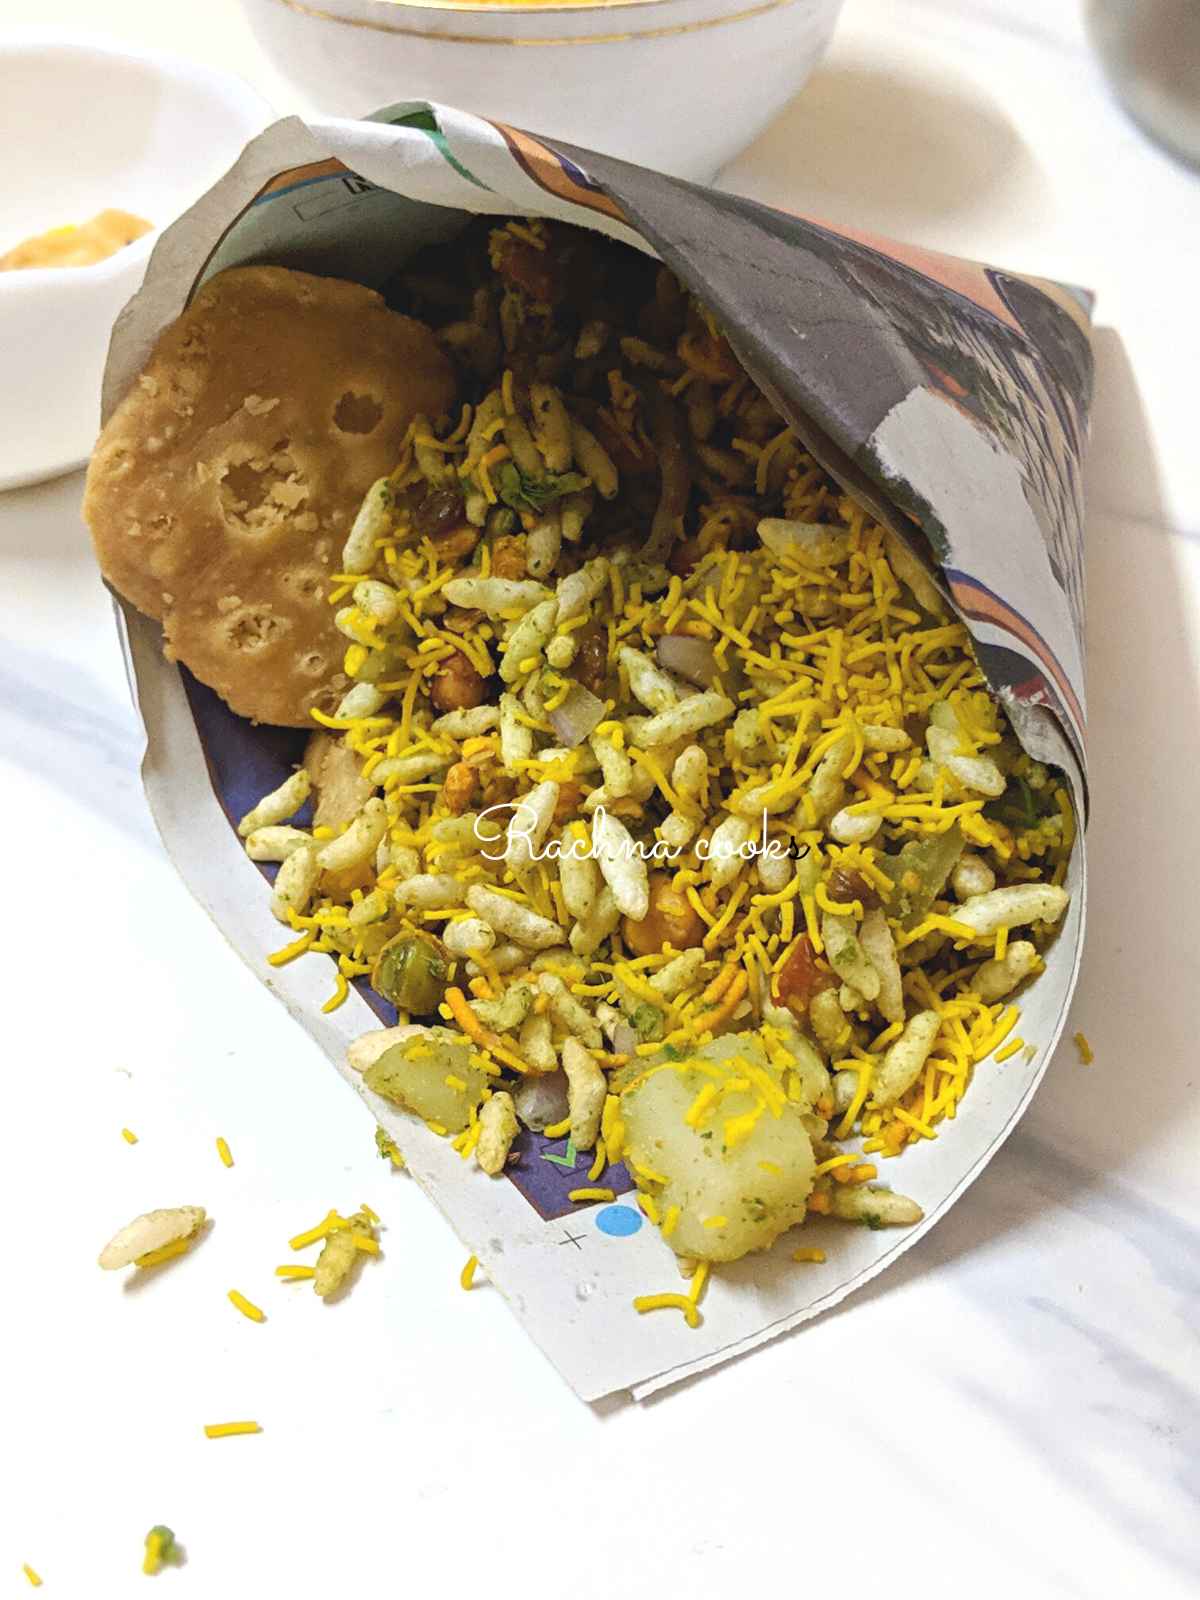 Bhelpuri served in a paper cone with papri visible.